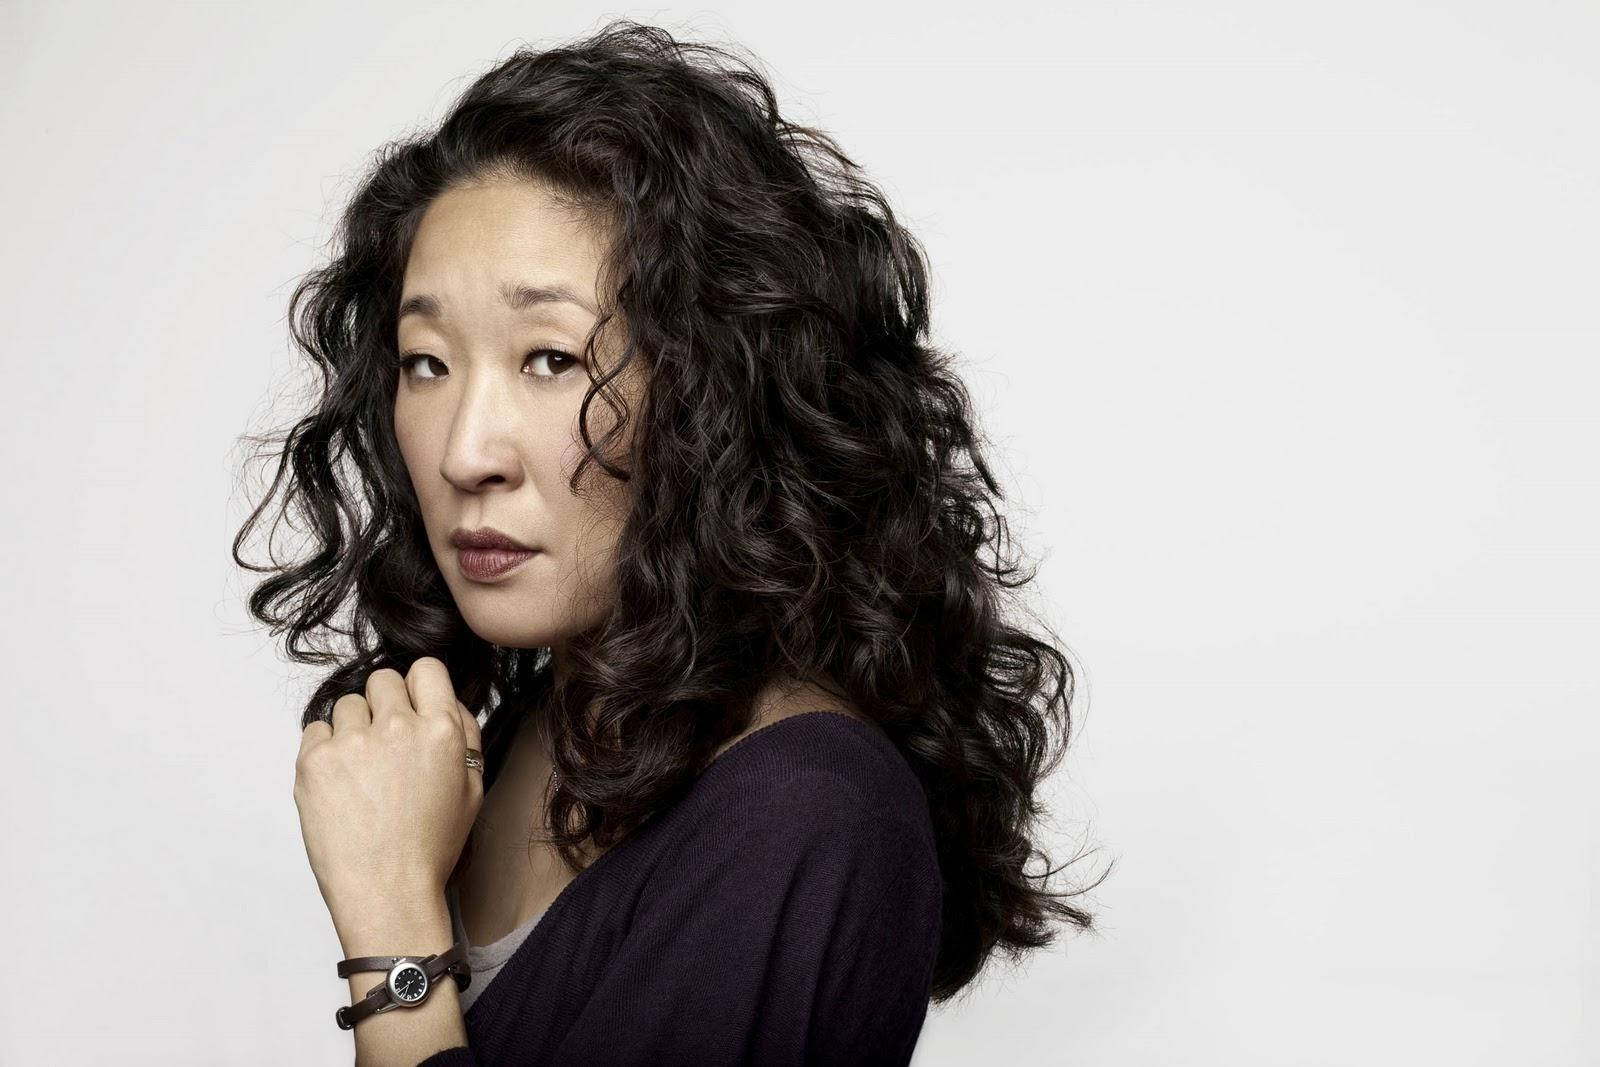 Sandraoh Marie Claire Magazin Fotoshooting Wallpaper